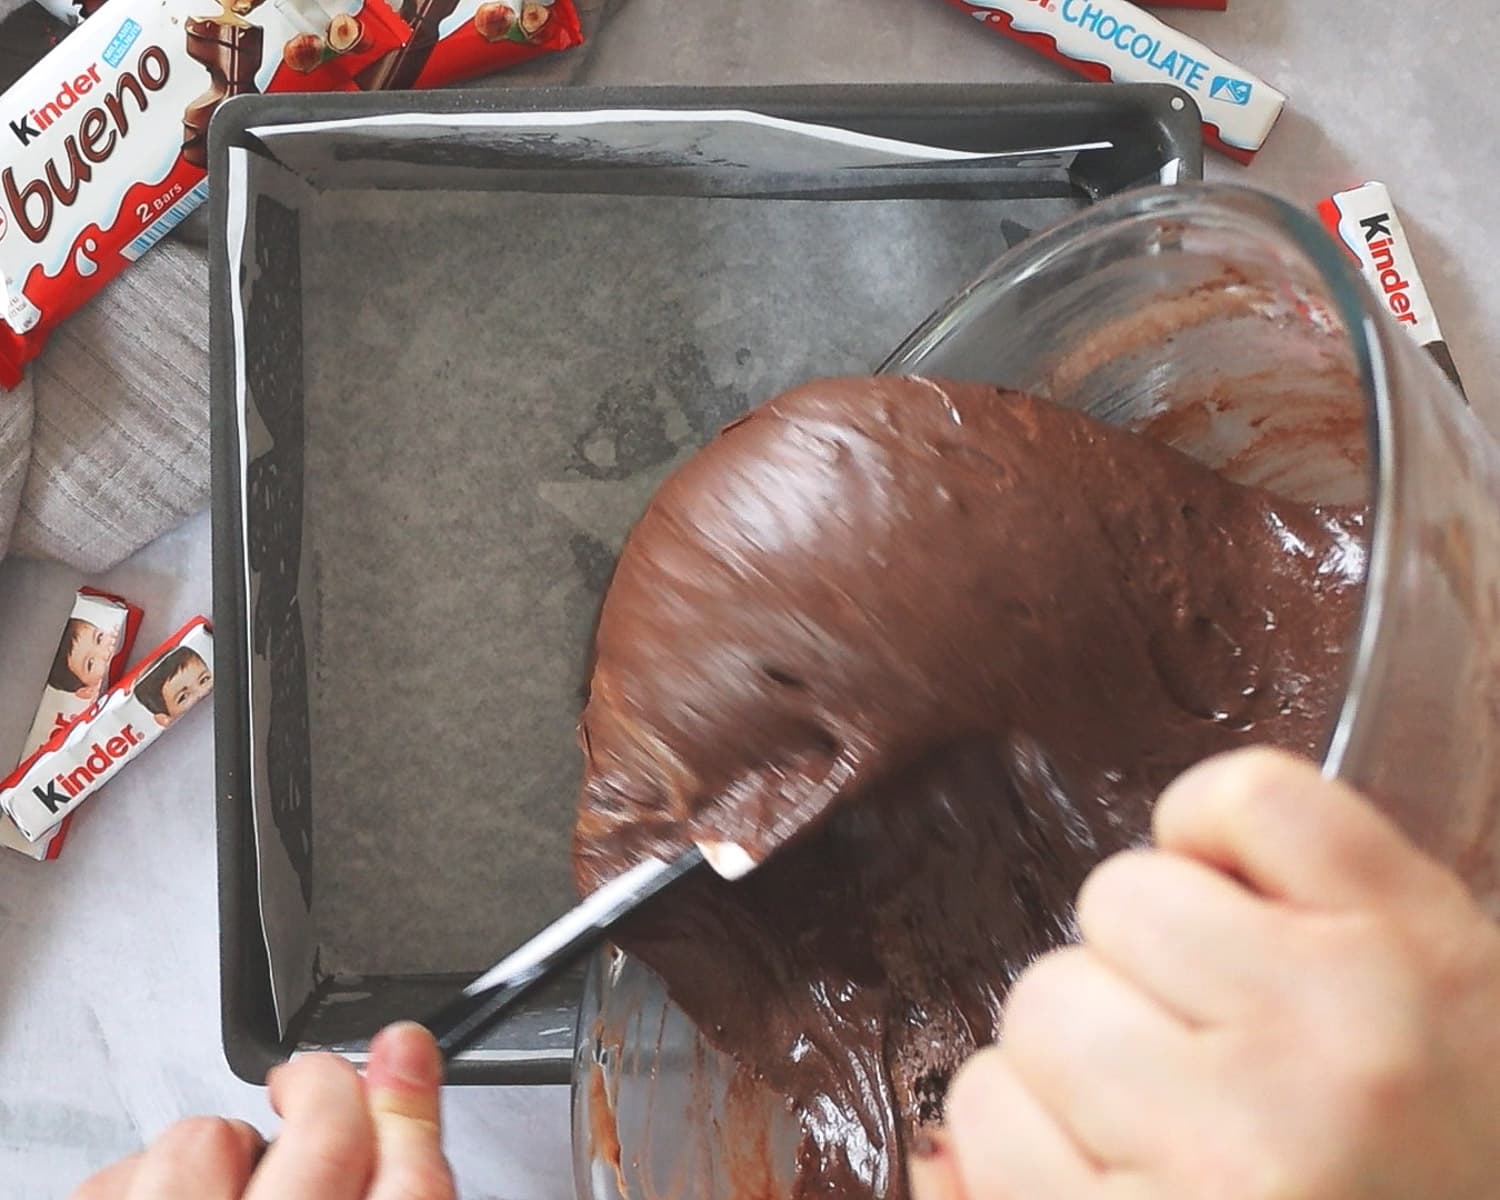 Pouring brownie batter into a lined baking pan